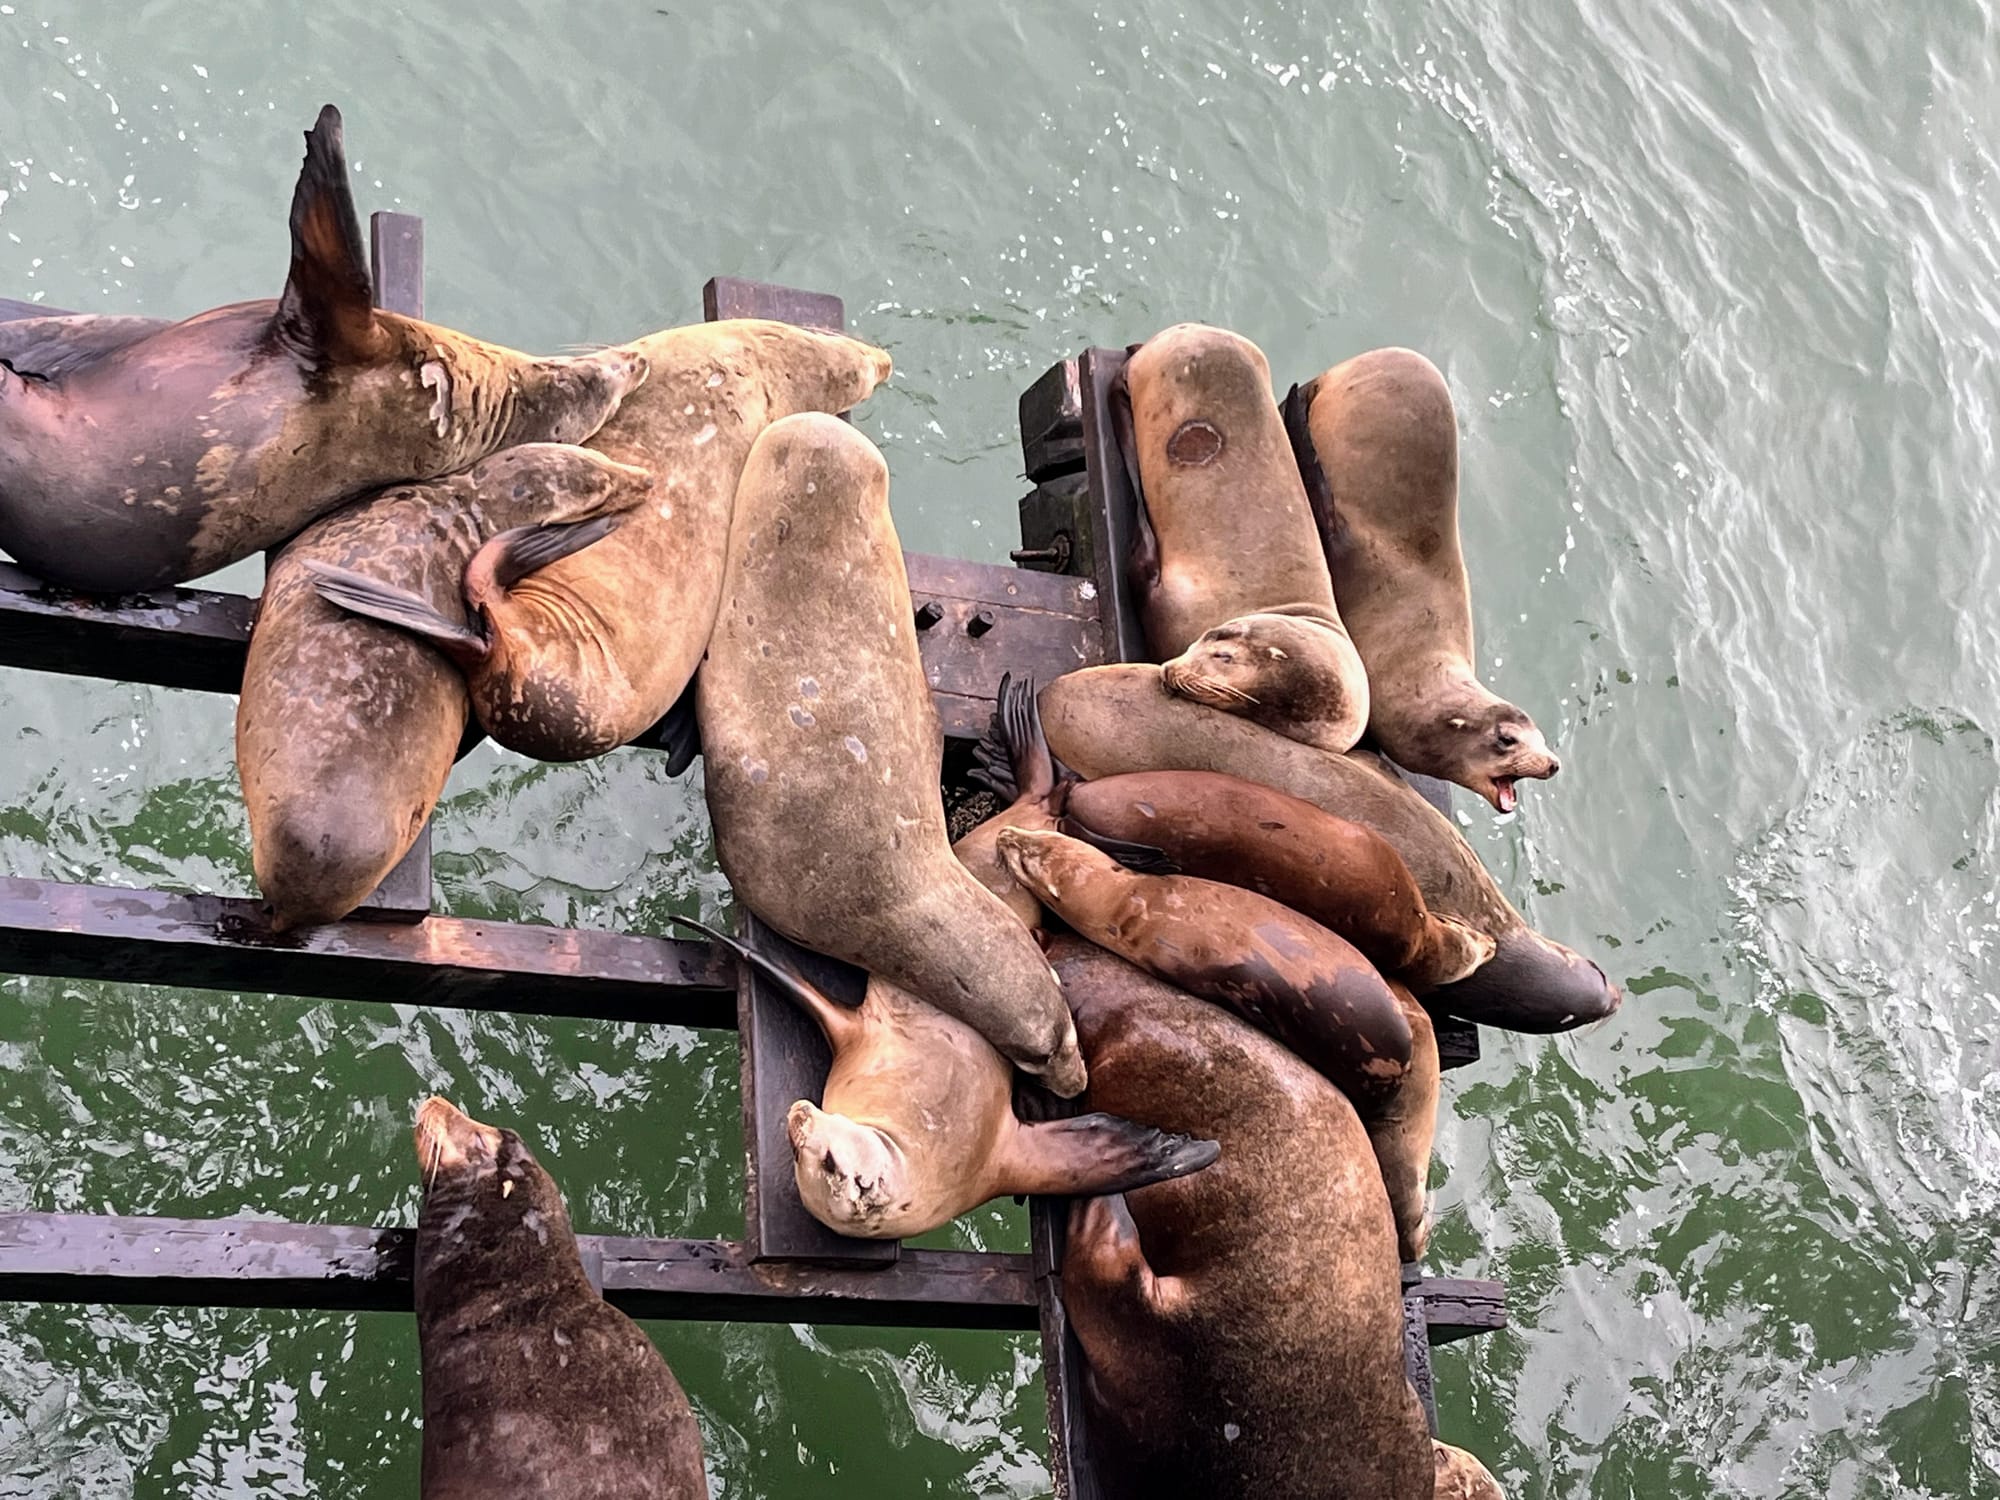 Sea lions lay on planks of wood beside a wharf.